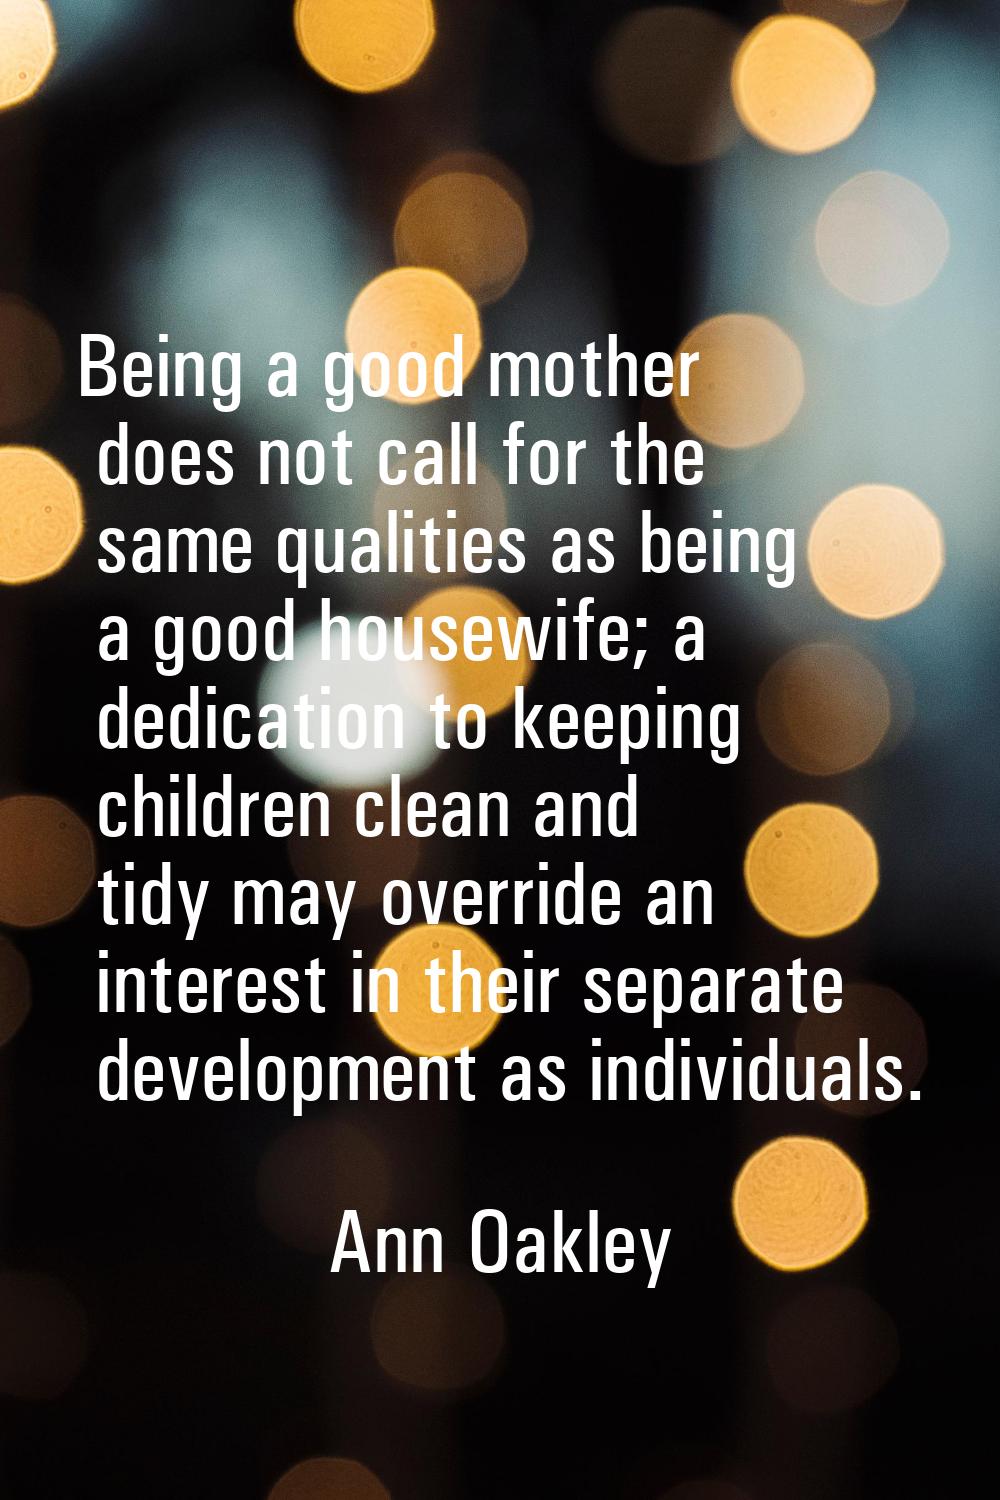 Being a good mother does not call for the same qualities as being a good housewife; a dedication to